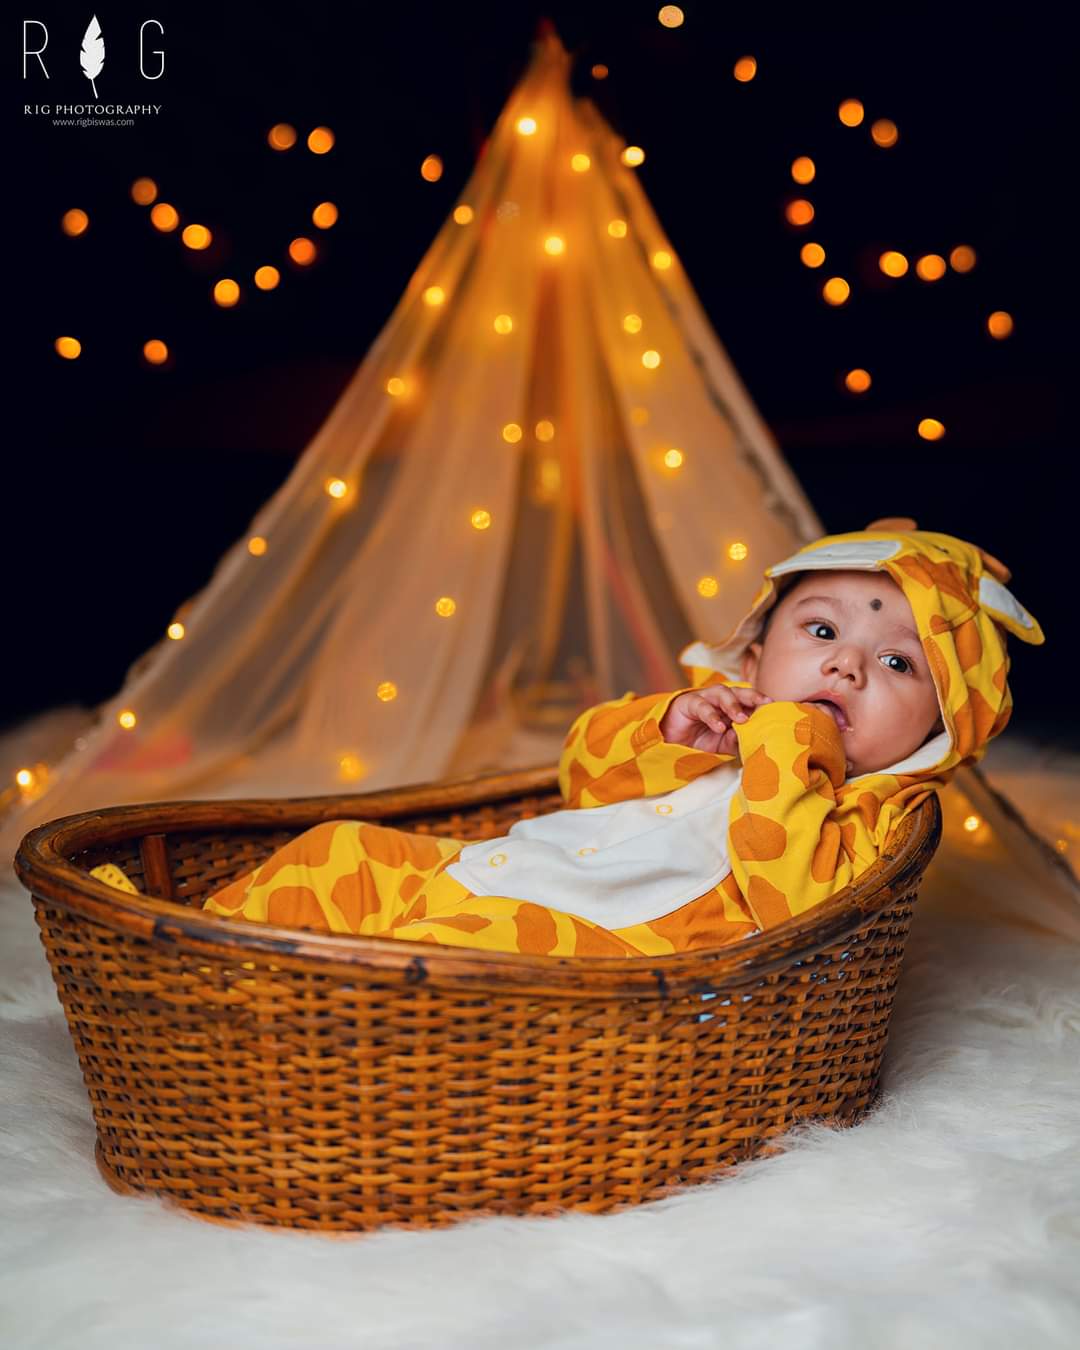 10 Creative Baby Shower Photoshoot Ideas at Home